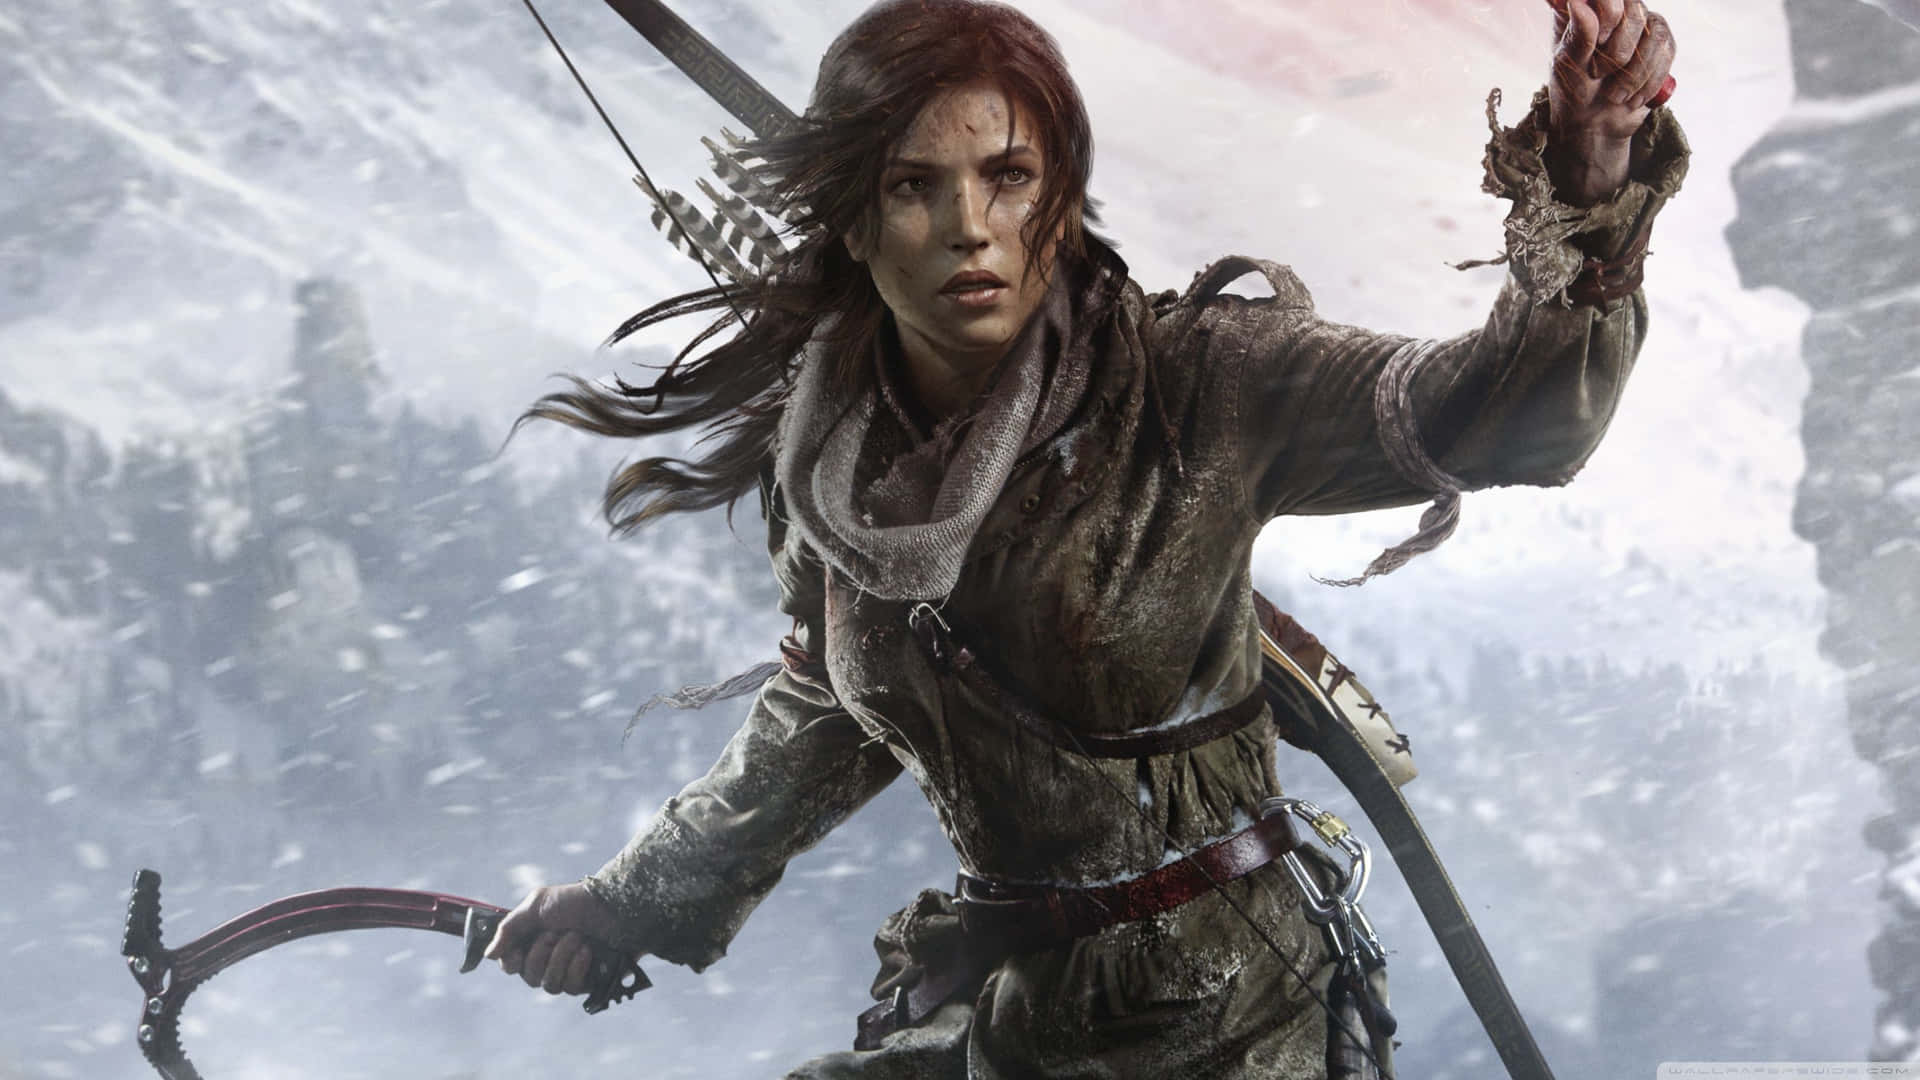 Lara Croft embarks on an epic journey in 'Rise Of Tomb Raider' Wallpaper